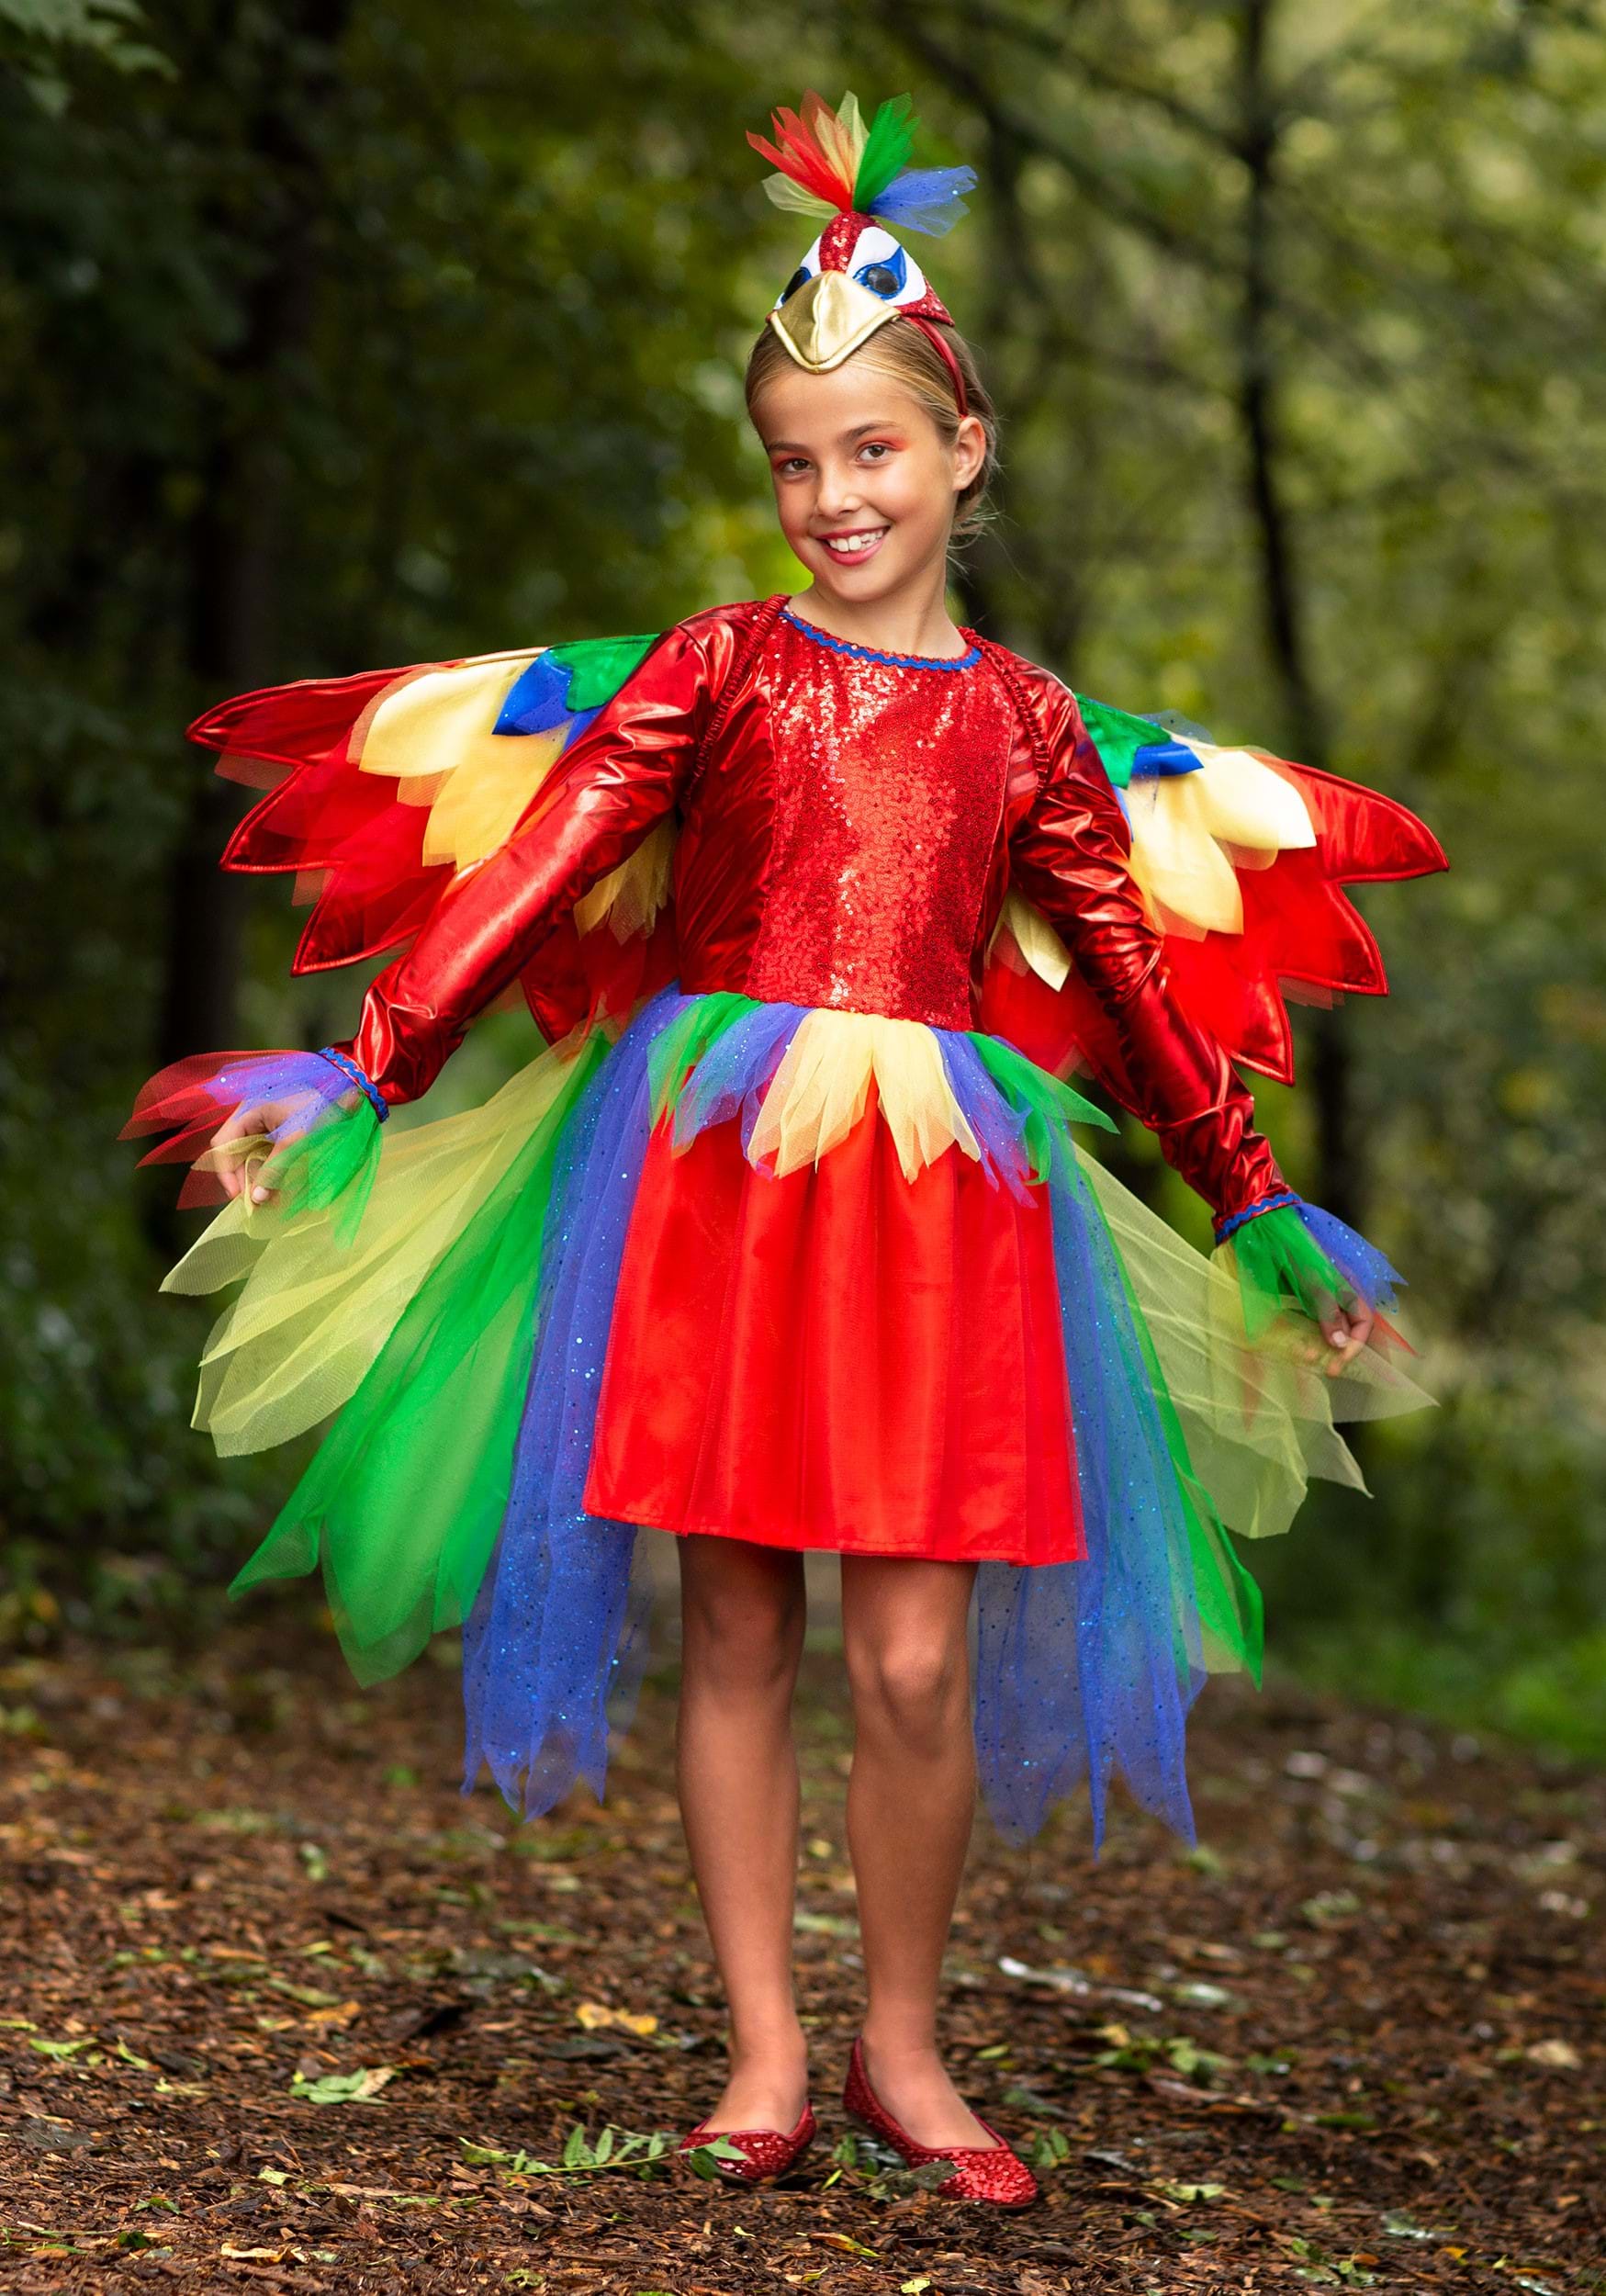 https://images.fun.com/products/71094/1-1/girls-tropical-parrot-dress-costume.jpg